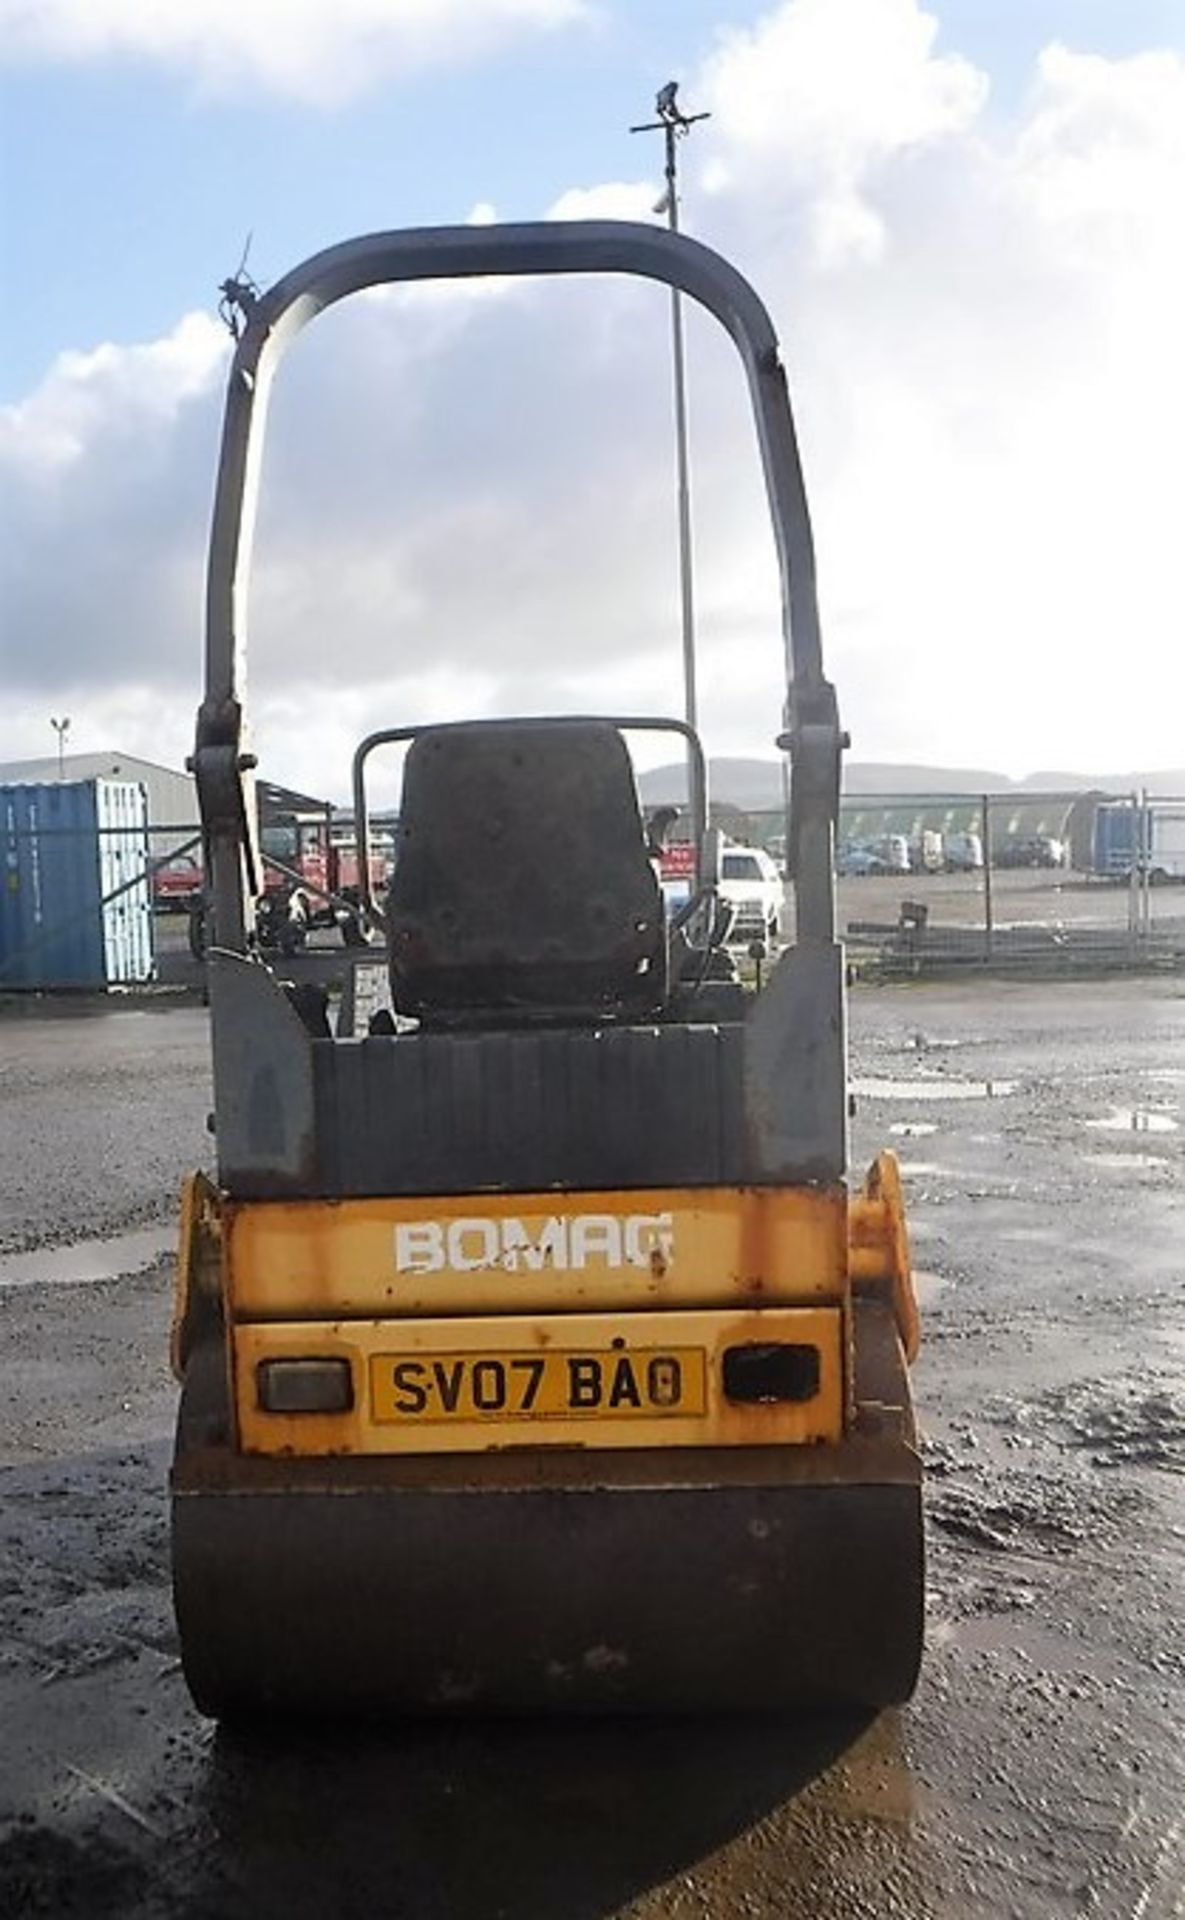 2006 BOMAG roller BW120AD-4 REG NO SV07 BAO 1022 hrs (not verified)SN - 101880023247 - Image 6 of 13